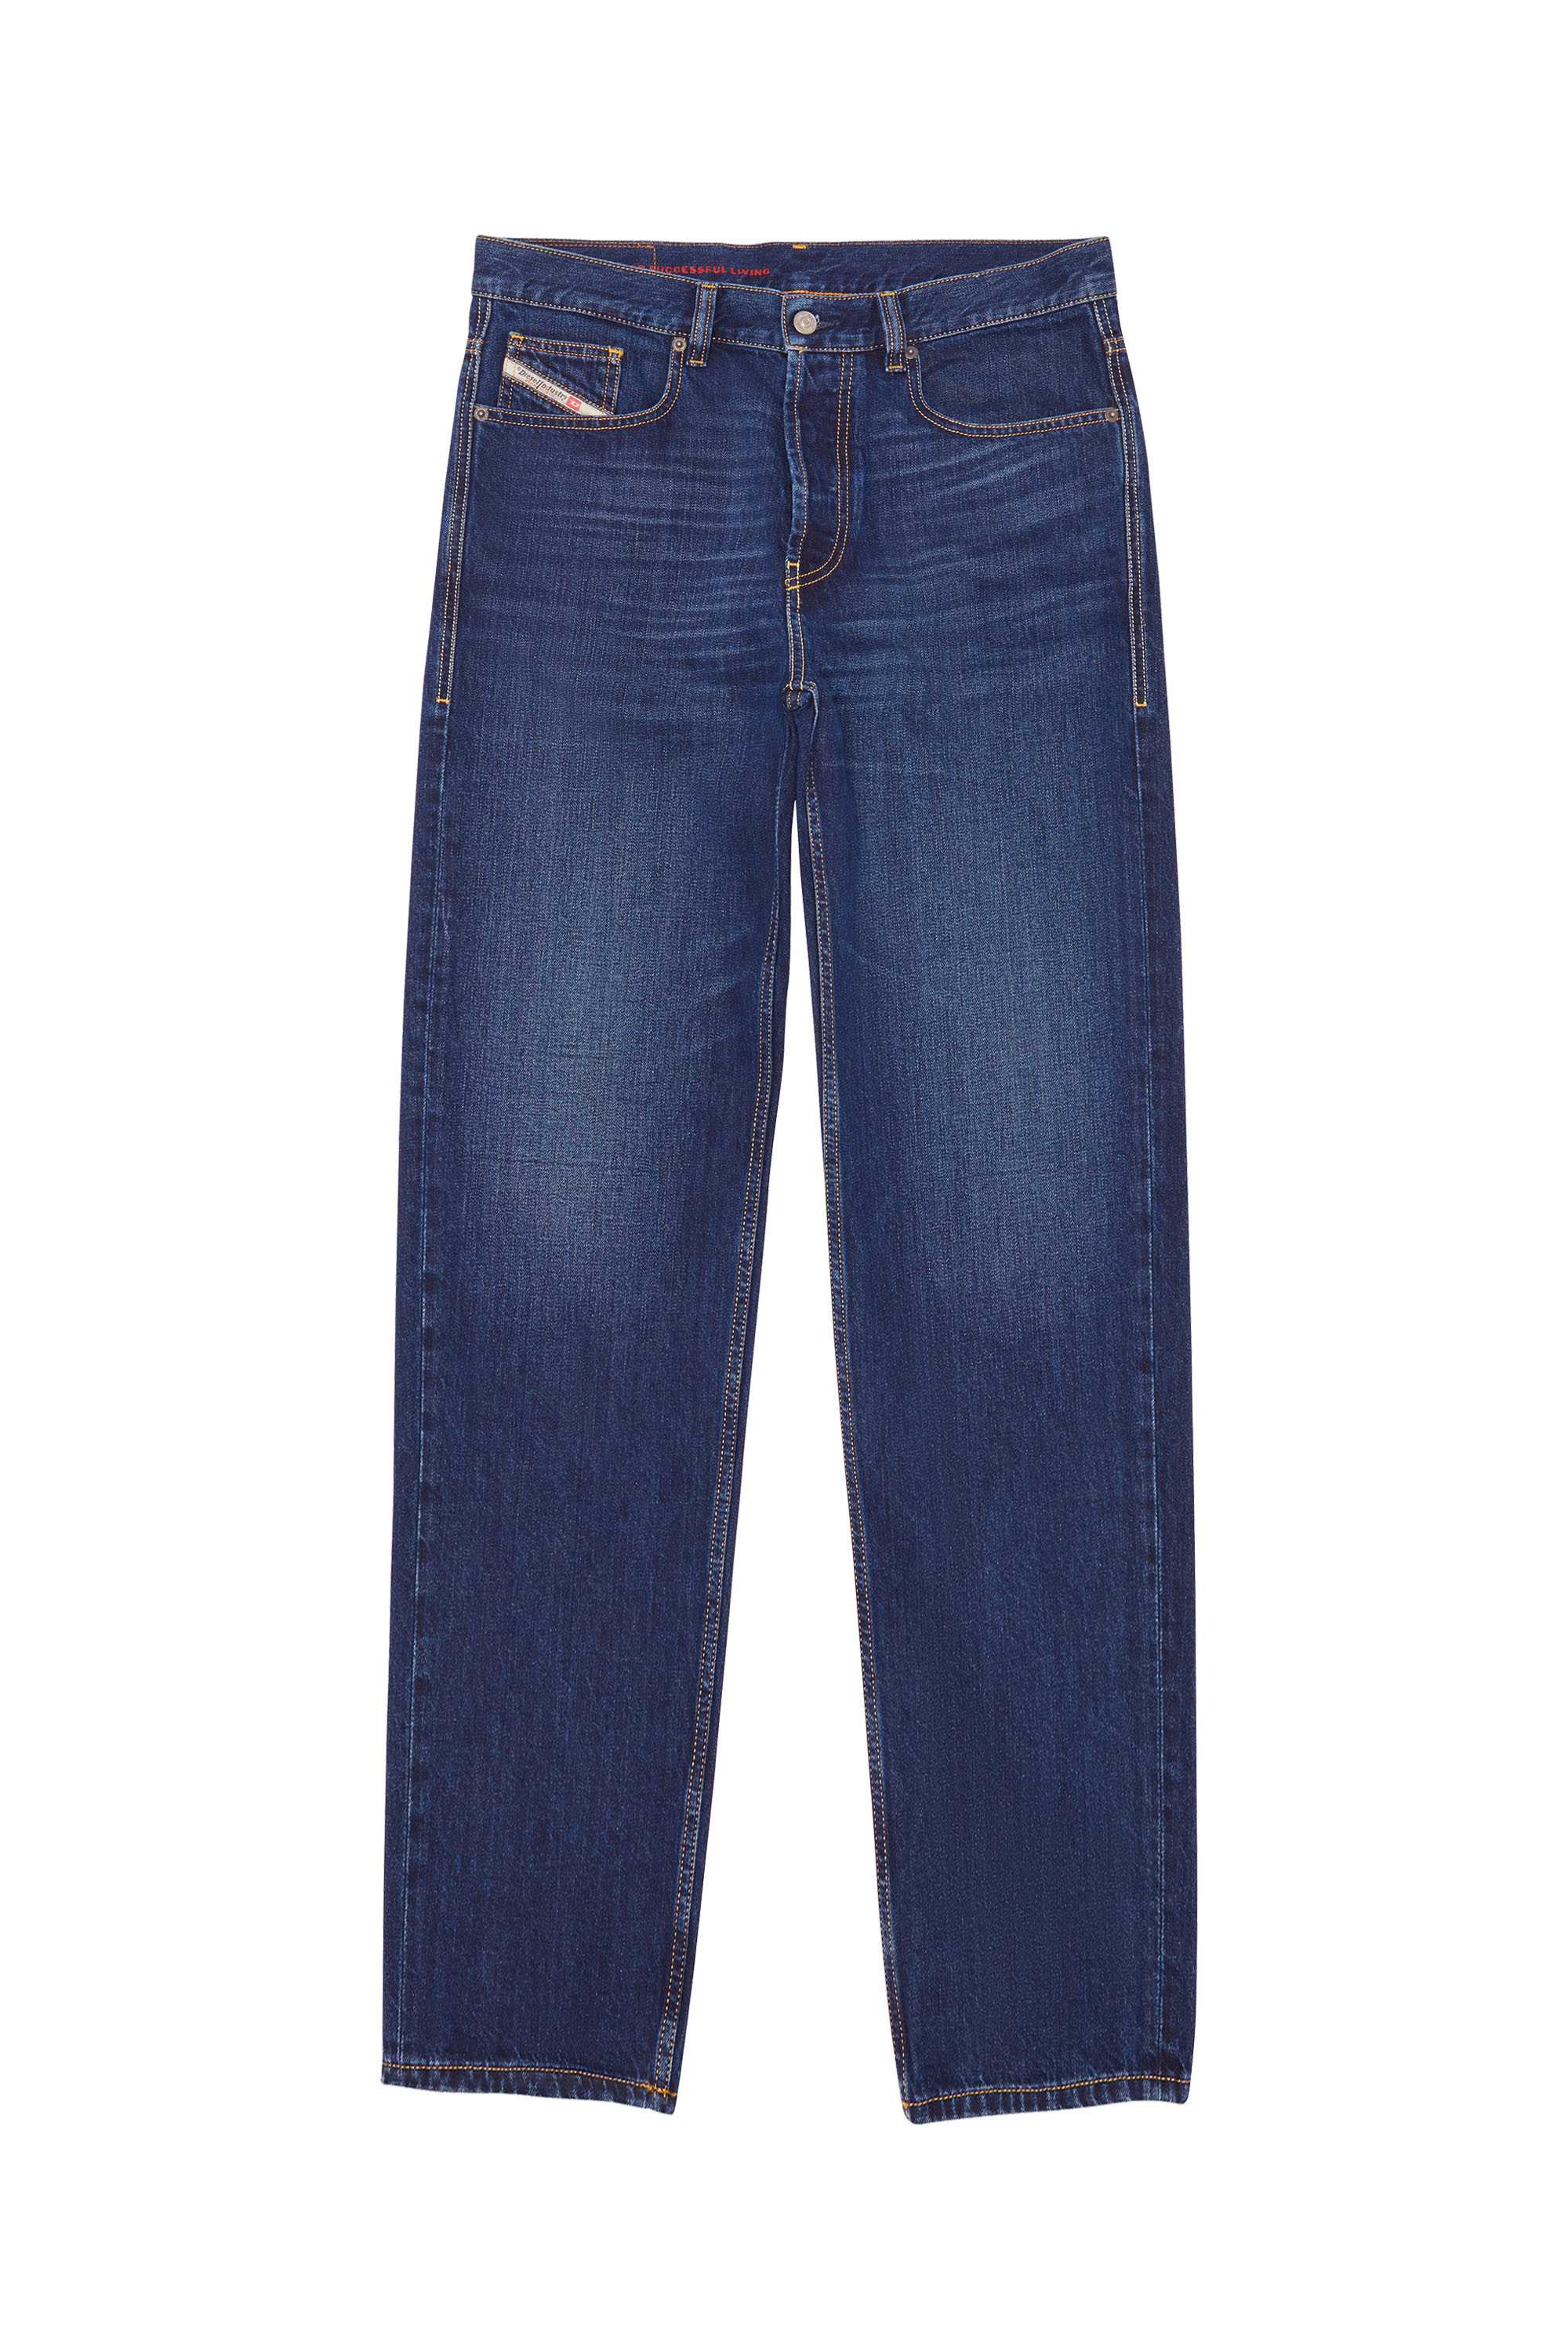 2010 09B96 Straight Jeans, Blu Scuro - Jeans